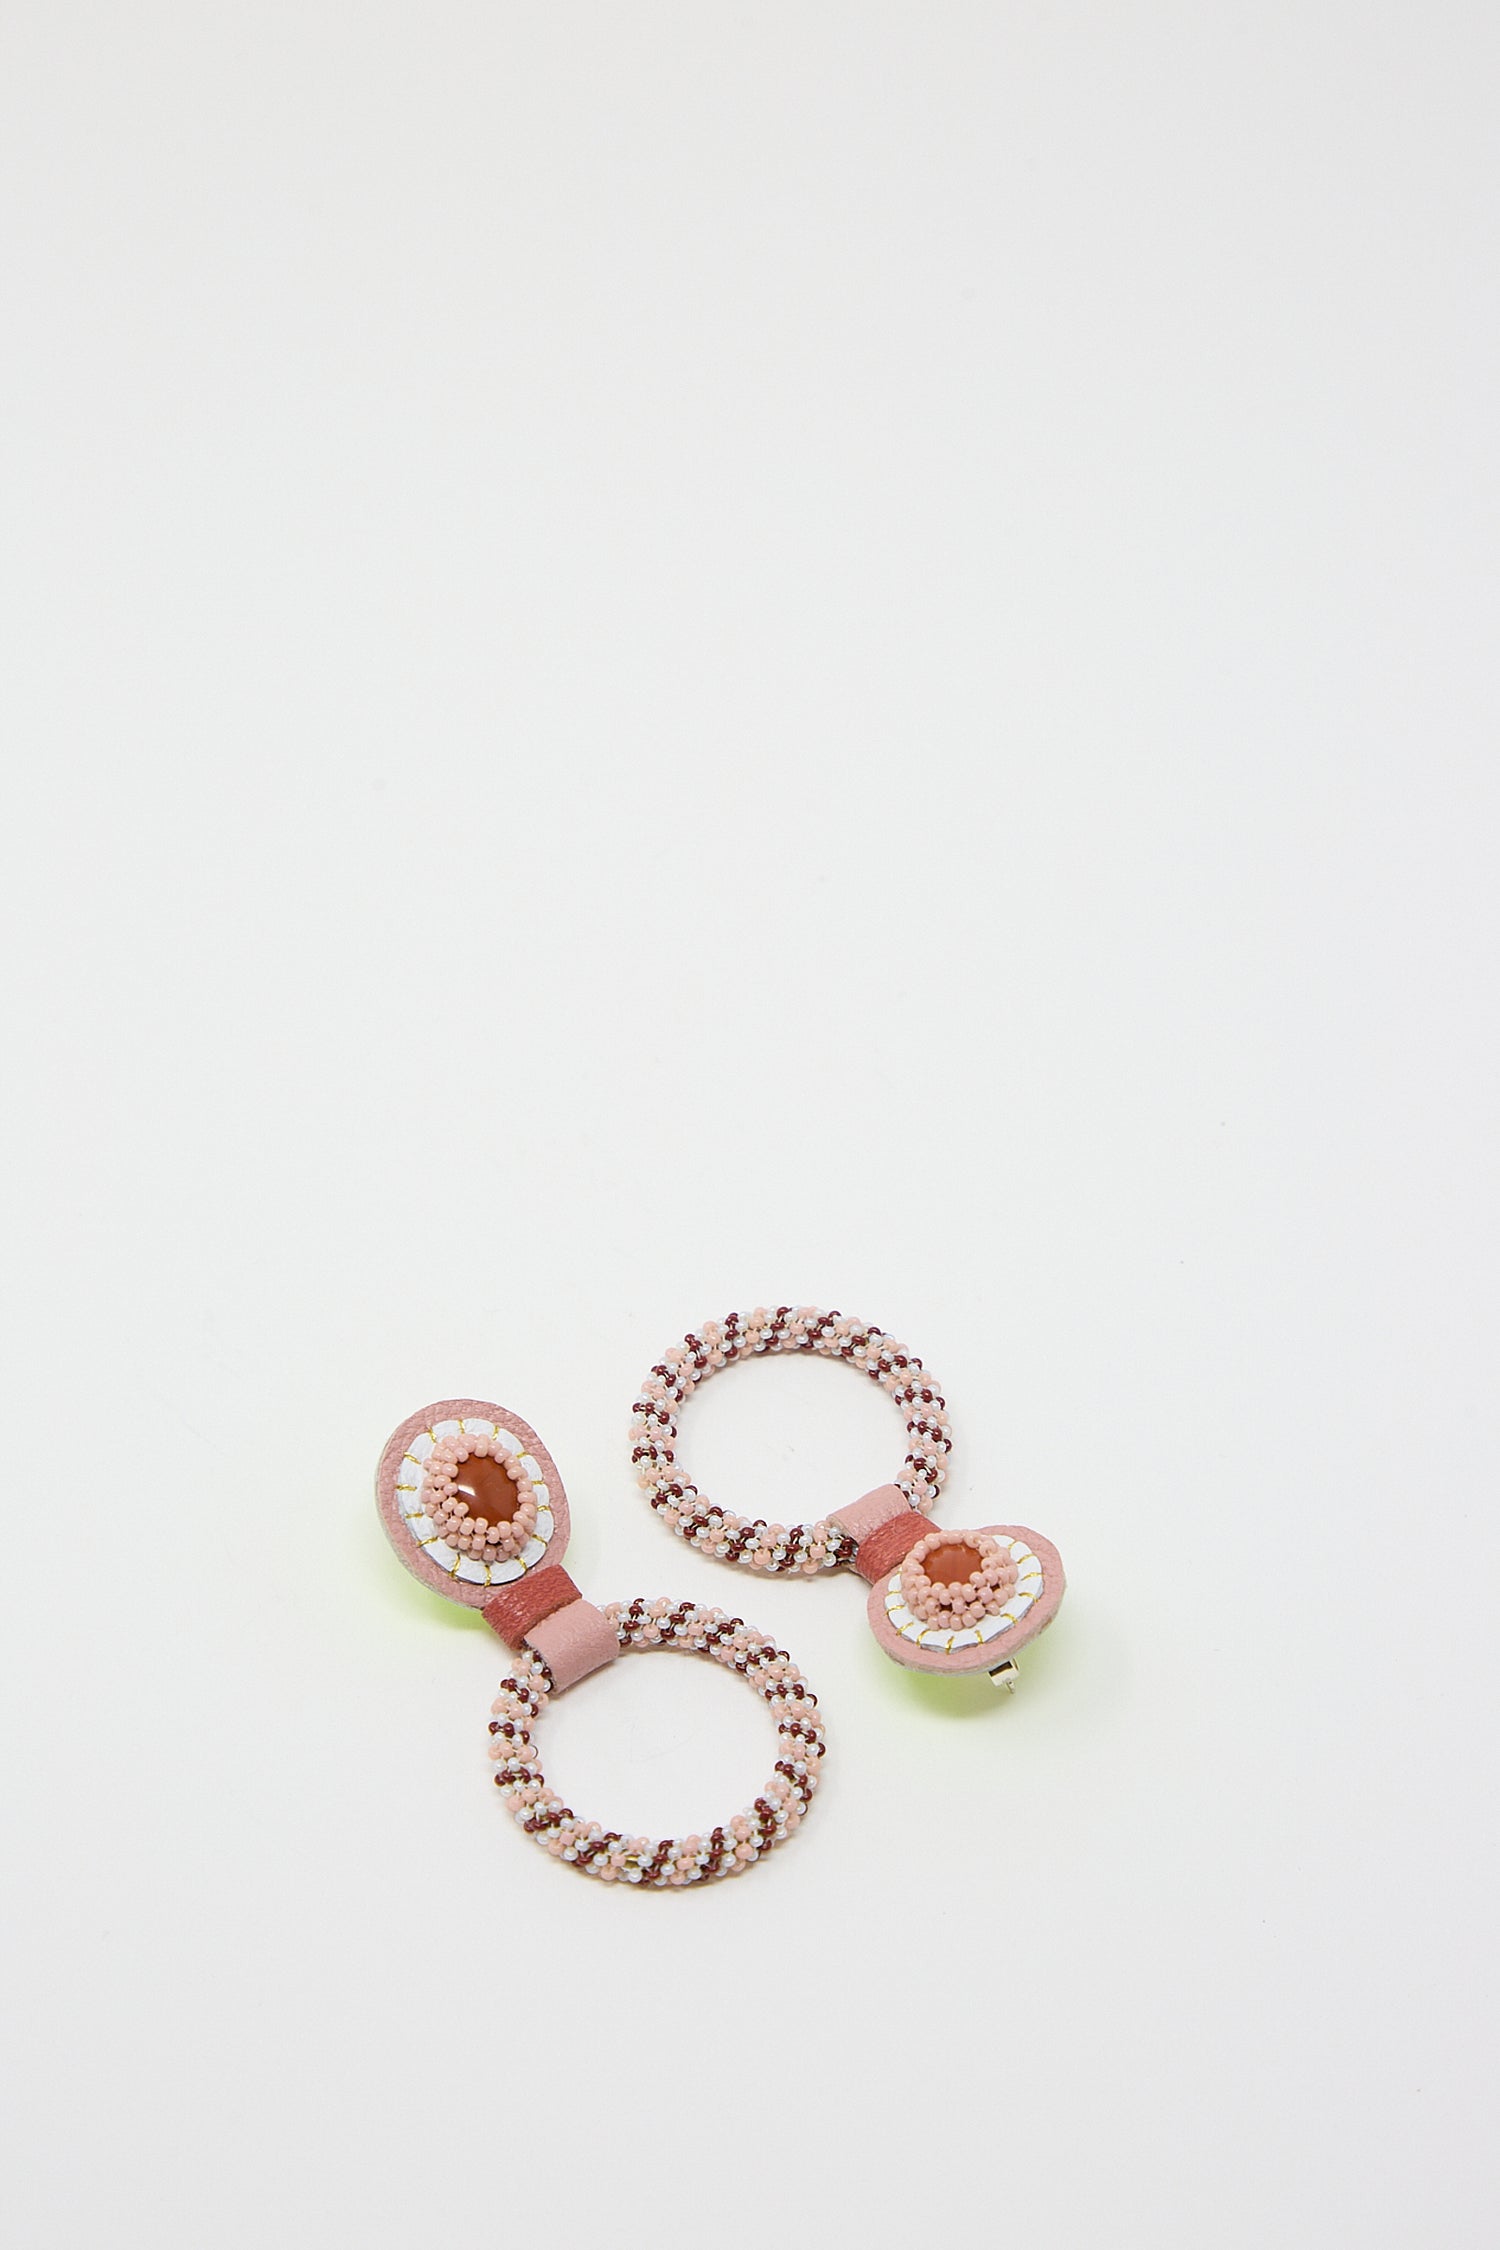 Beaded bracelets with Red Jasper stones from Robin Mollicone on a white background.